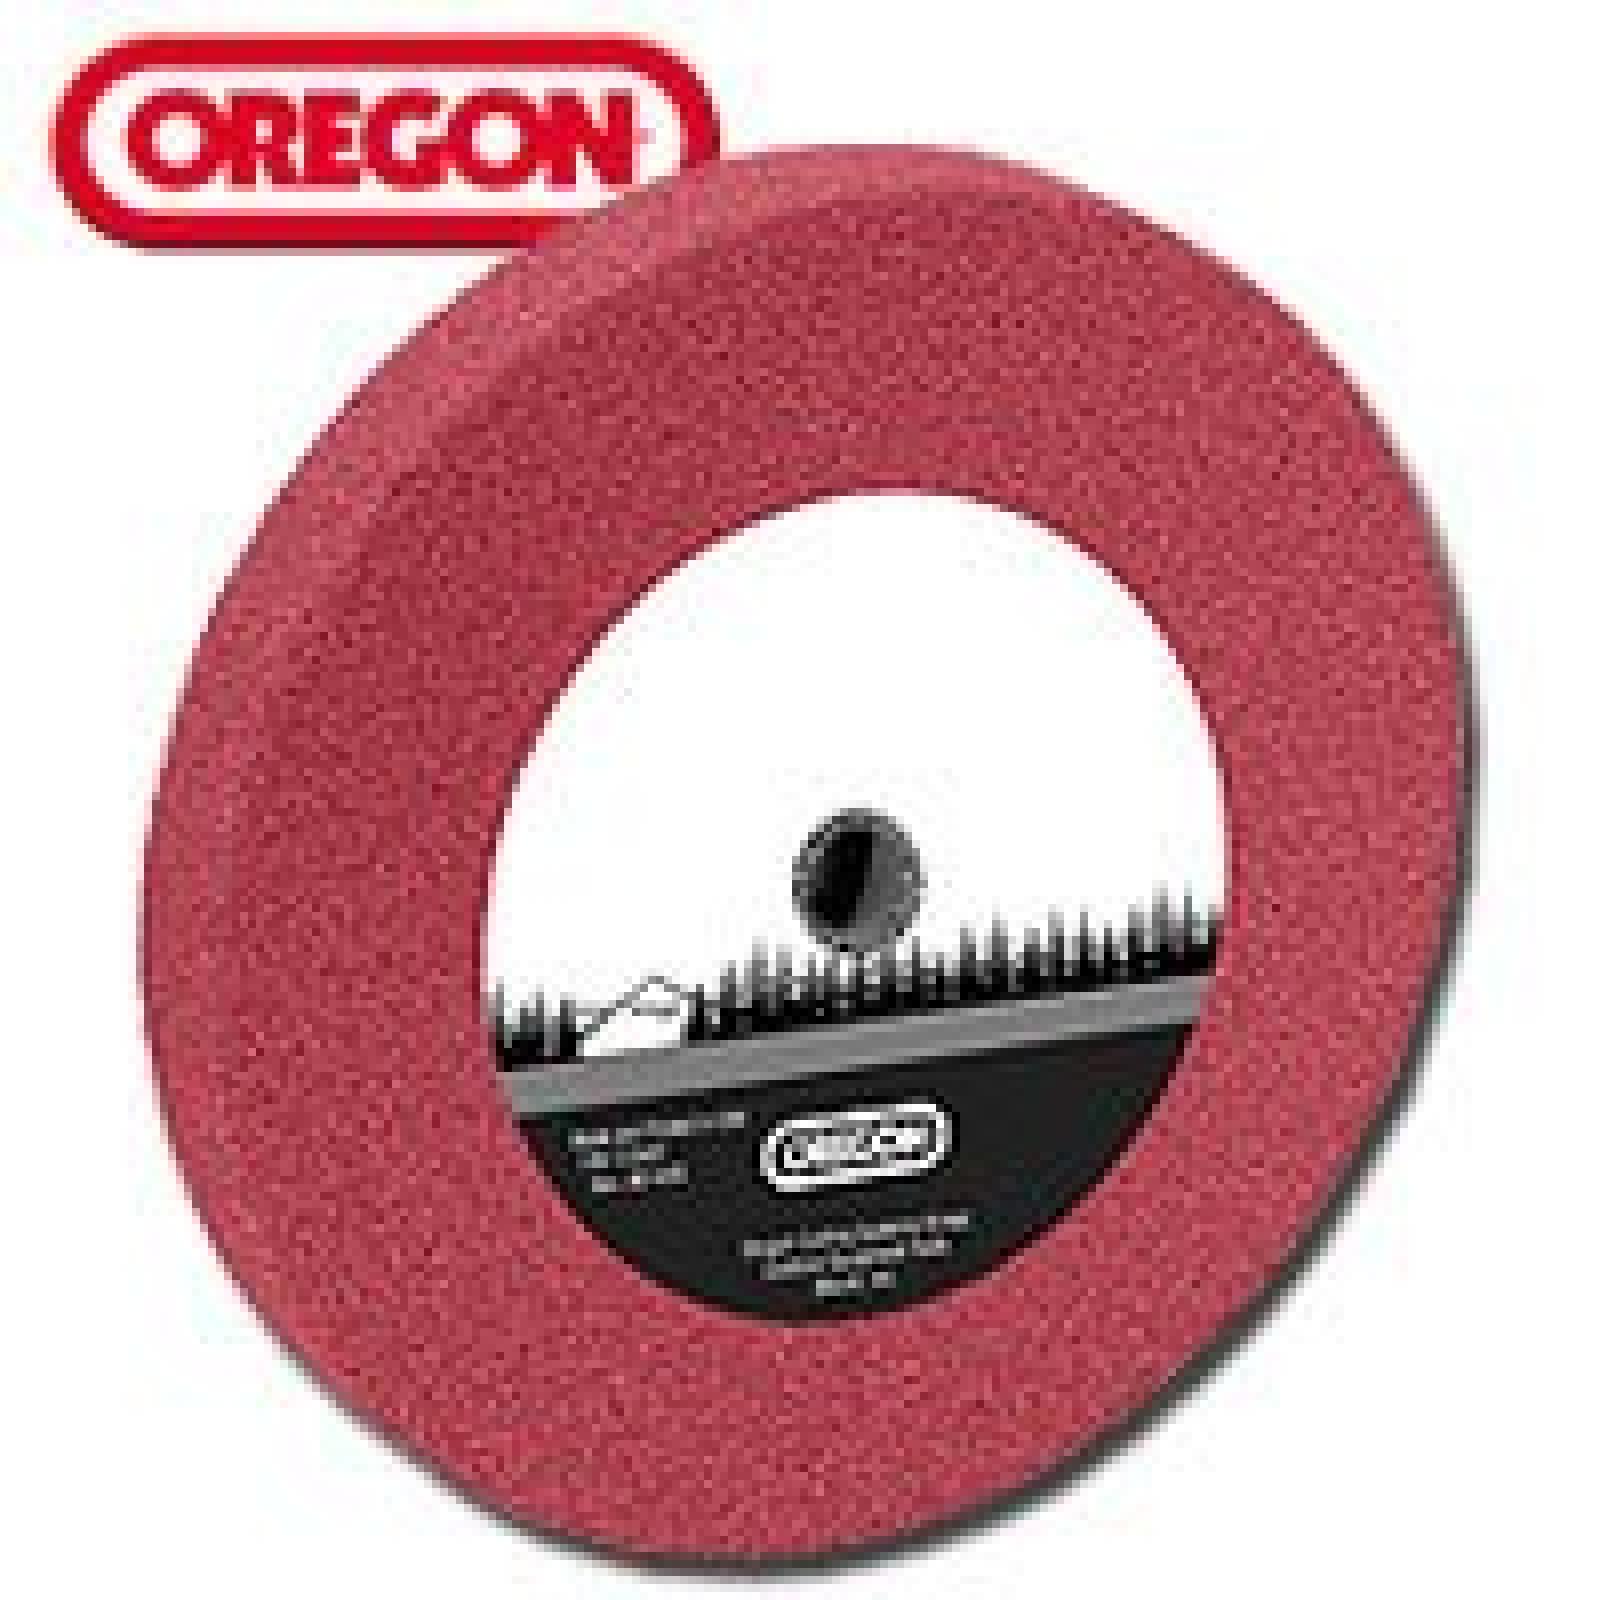 GRINDING STONE 12 INCH 30 part# 88-039 by Oregon